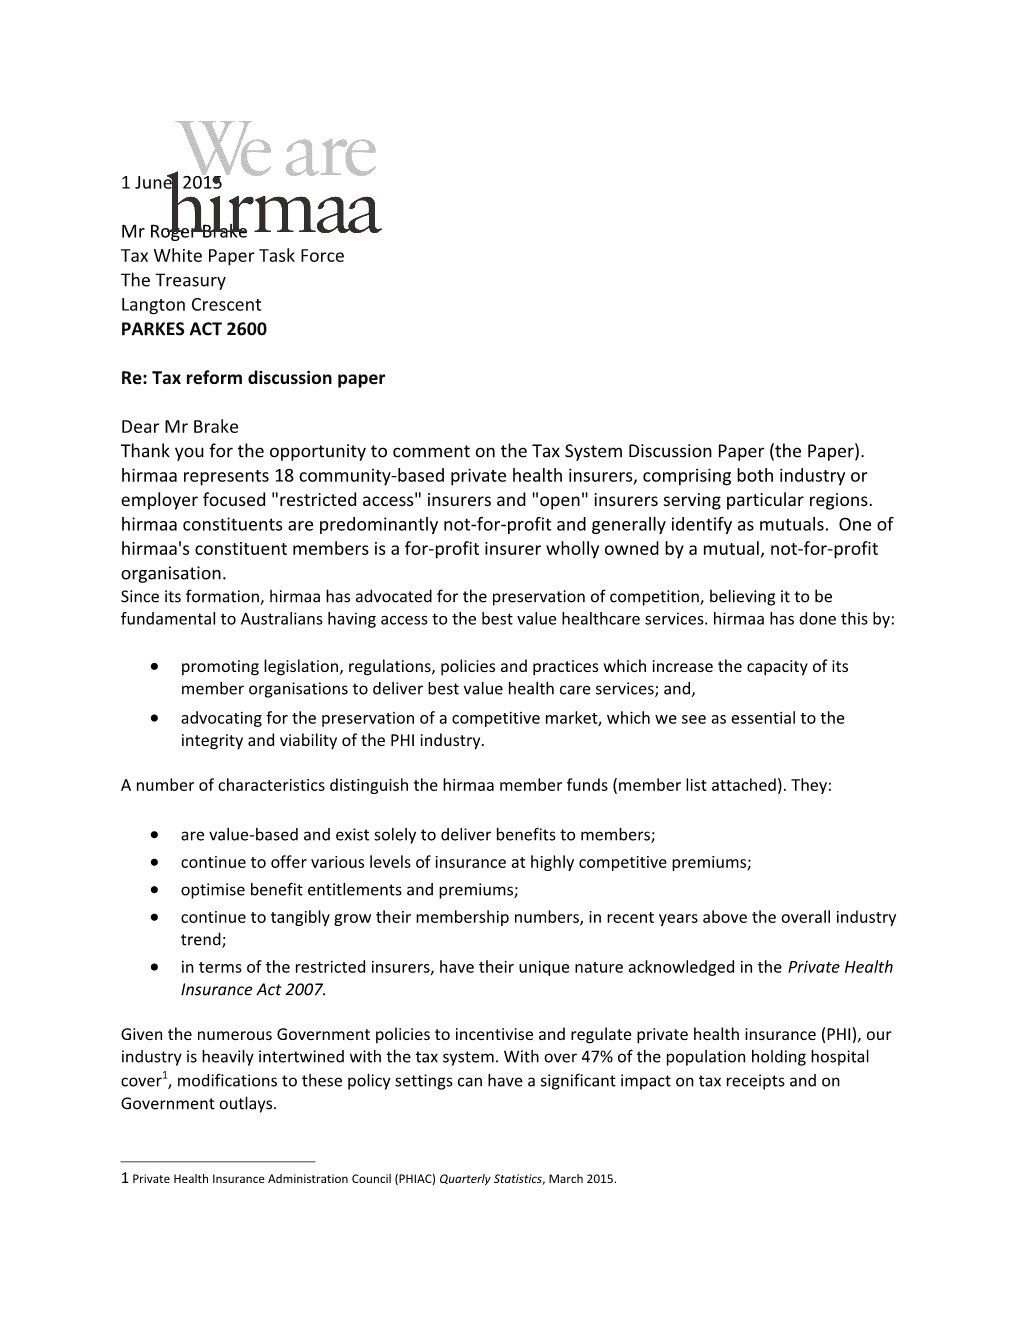 HIRMAA - Submission to the Tax Discussion Paper